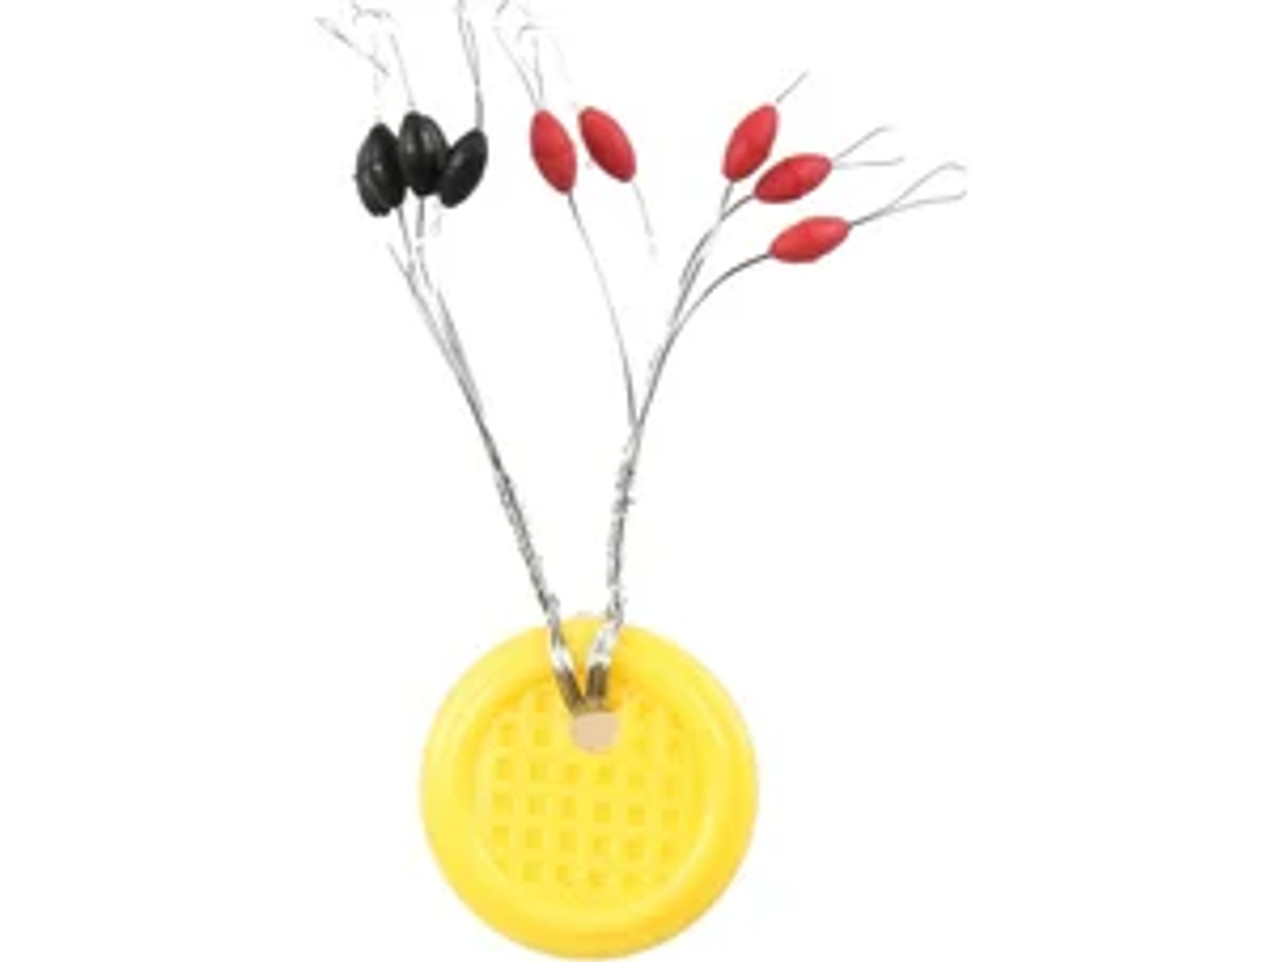 Beau Mac Bobber Stop Eggs Rubber with Beads | FishUSA